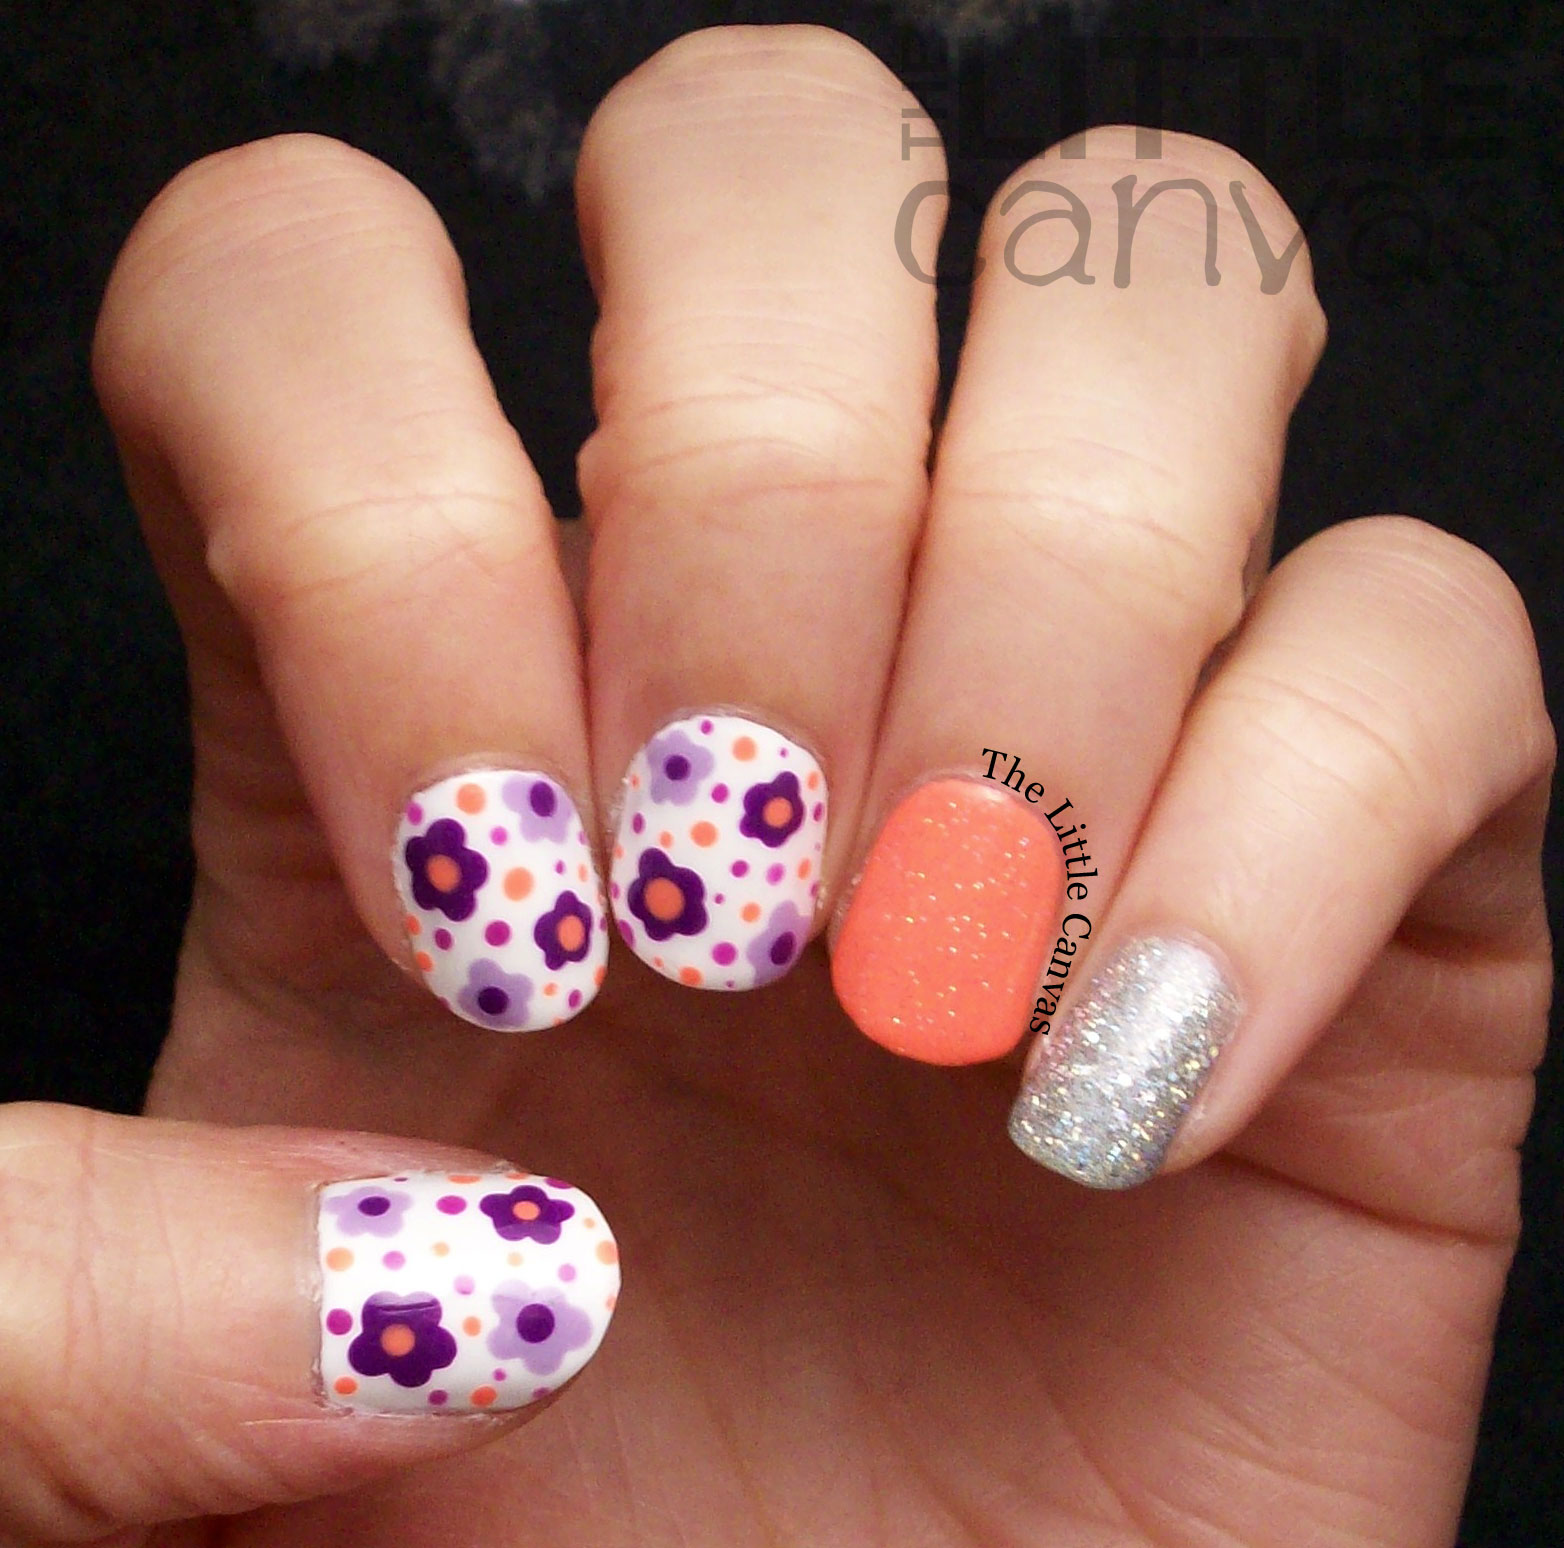 How to do flower nail art - B+C Guides